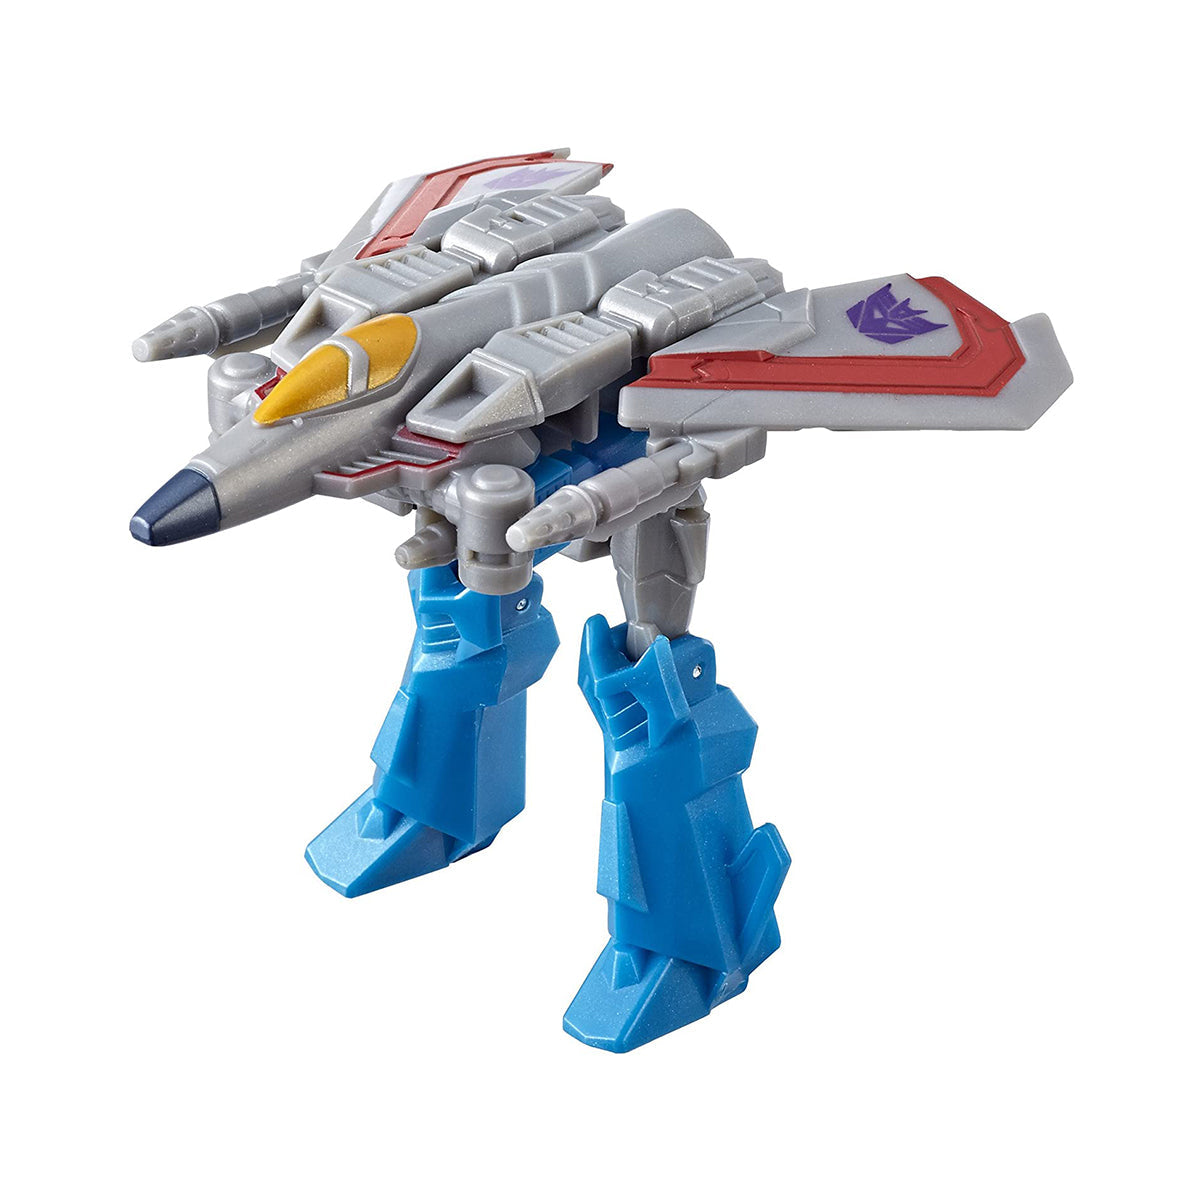 Transformers Cyberverse Scout Class (Styles Vary)